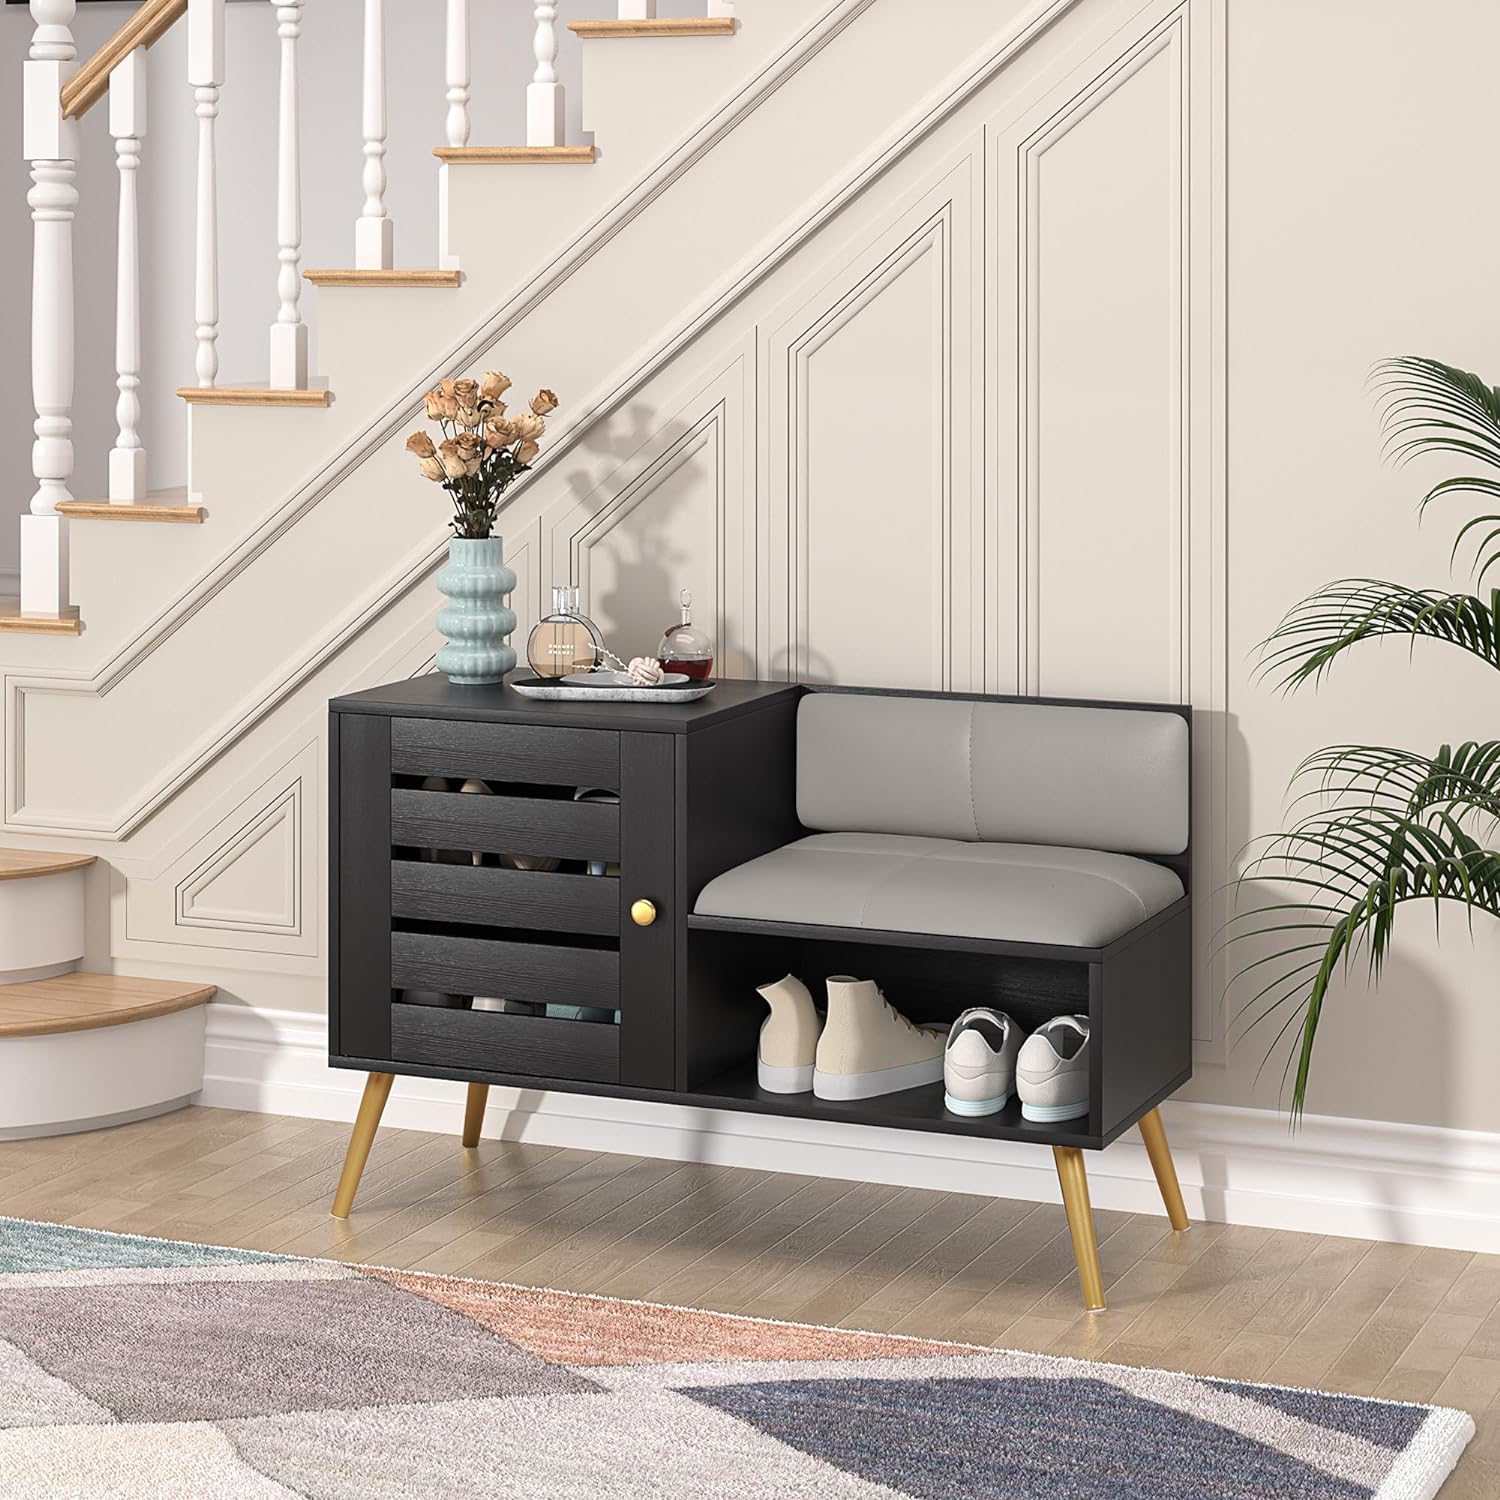 VECELO Entryway Bench with Storage Shoe Cabinet & Adjustable Shelf Louvered Door Removable PU Seat Cushion and Backrest